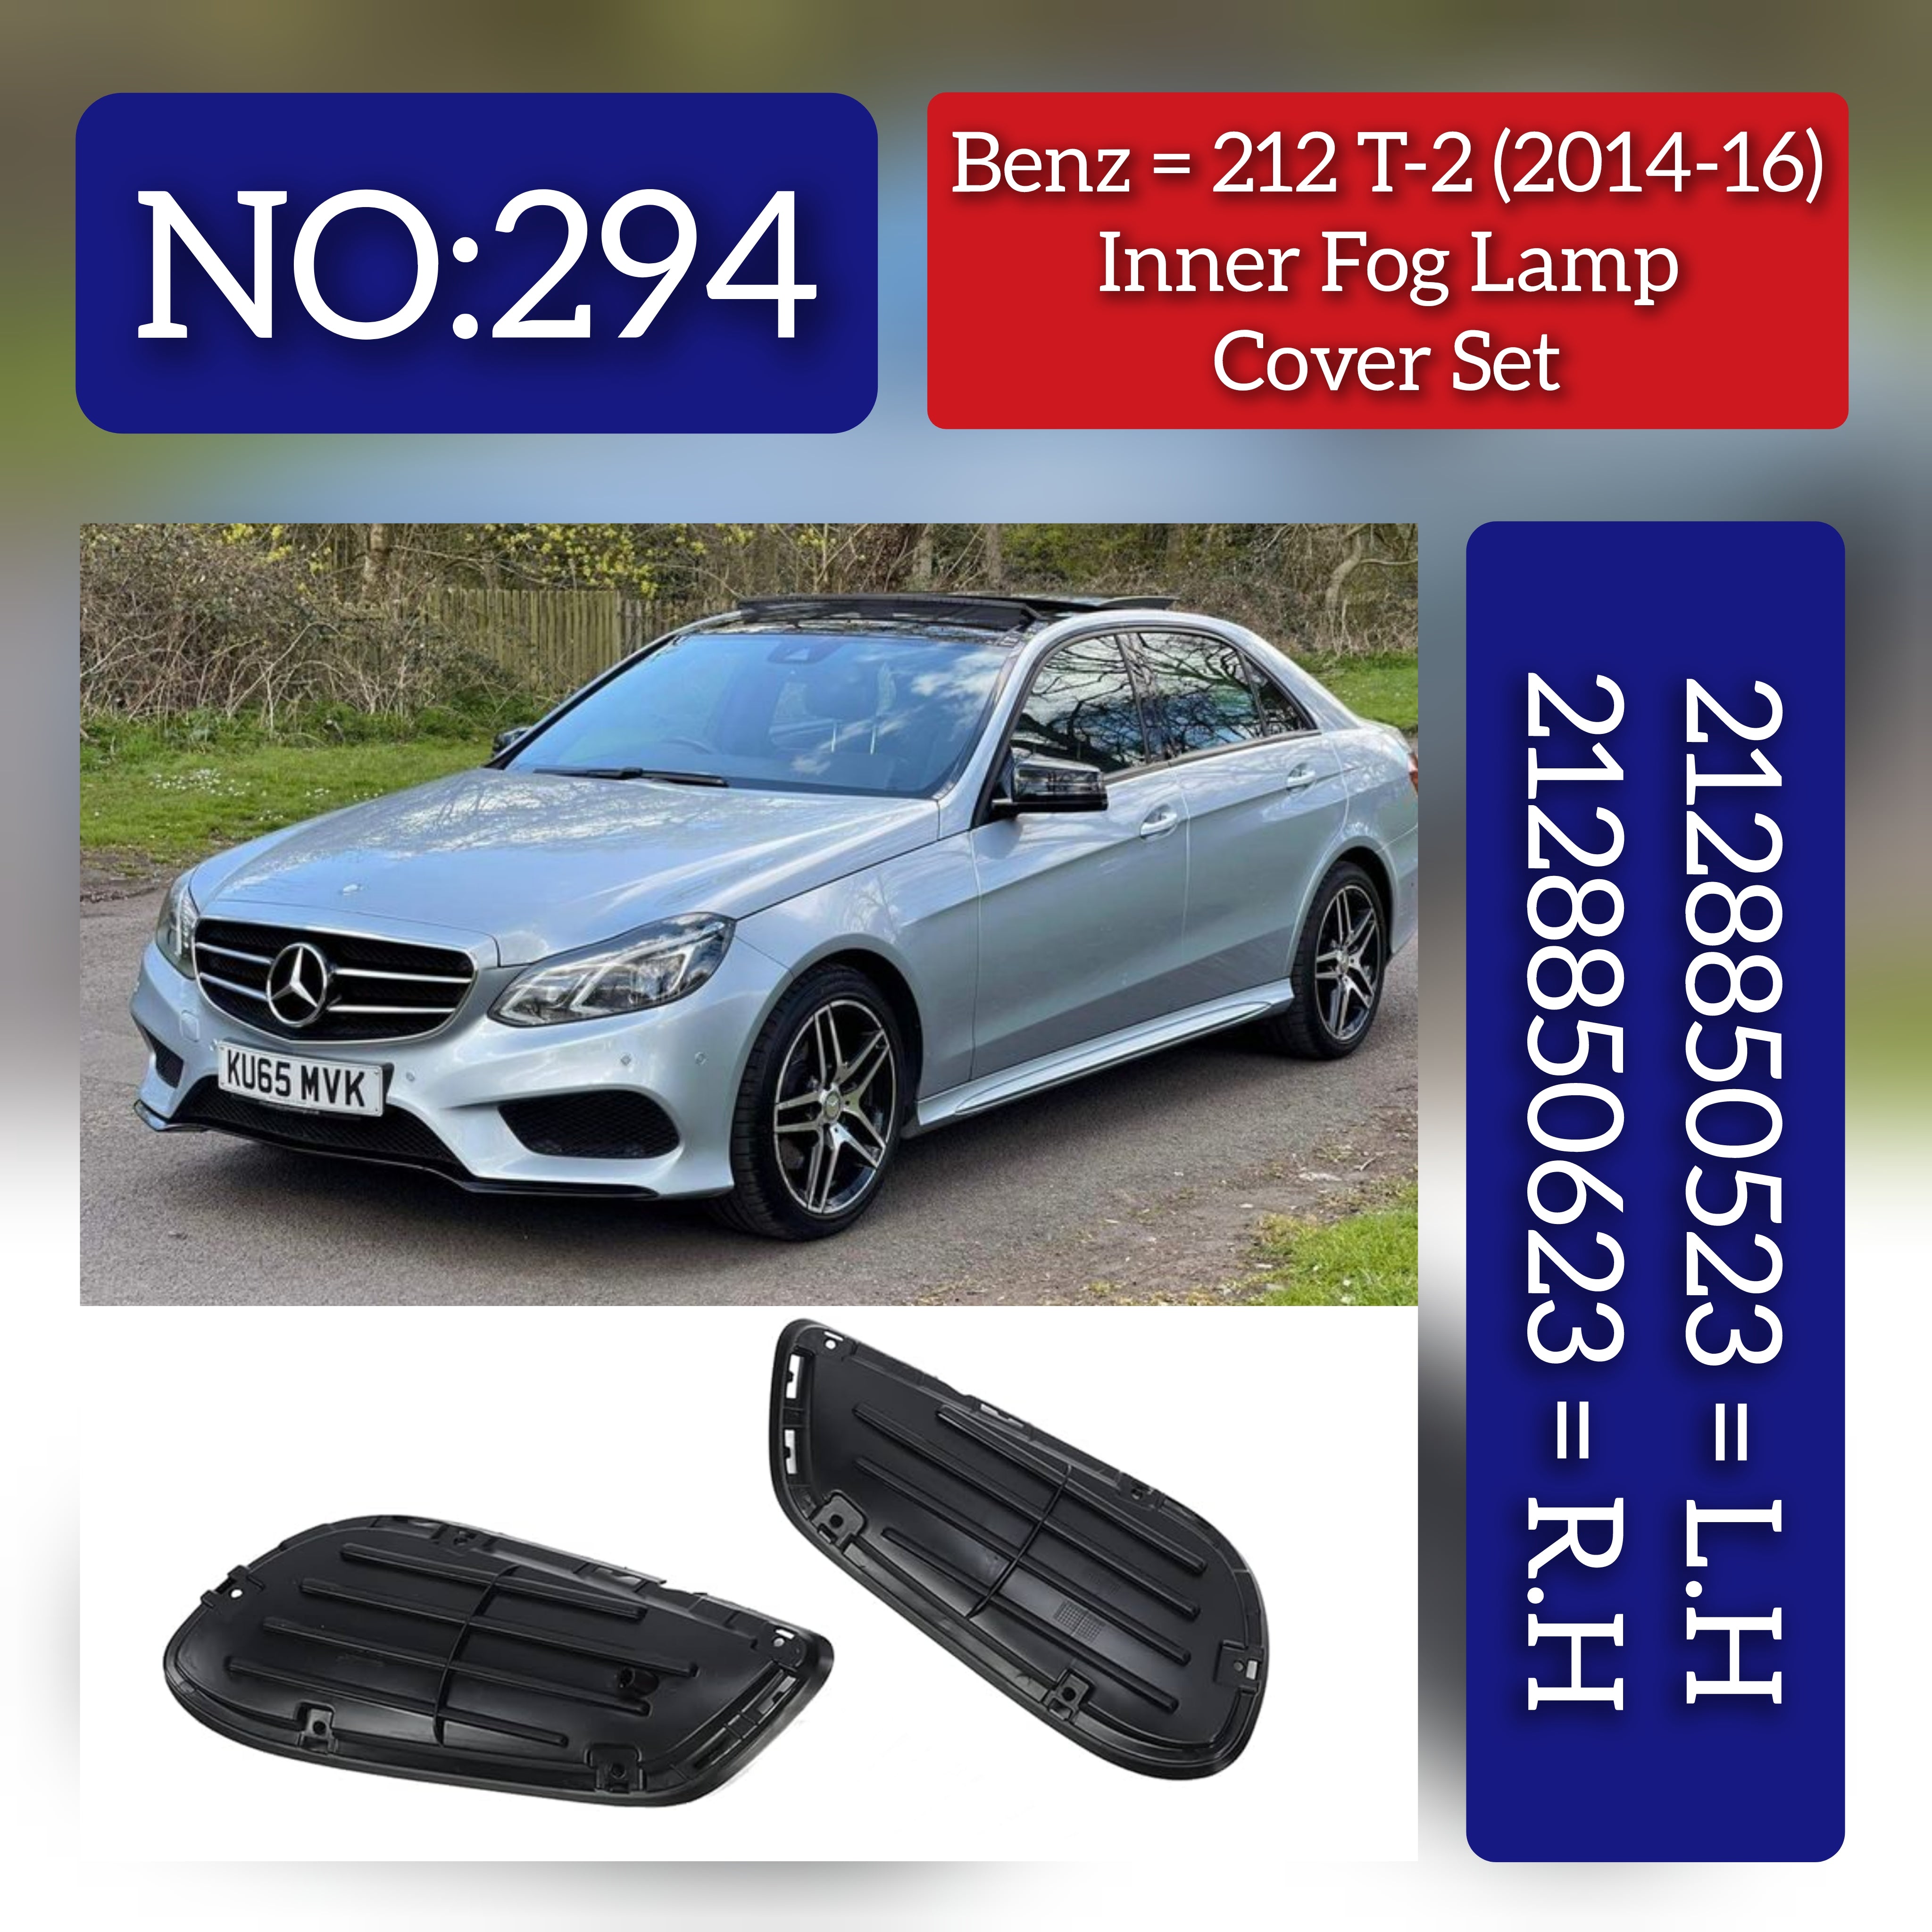 Inner Fog Lamp Cover Compatible With MERCEDES-BENZ E-CLASS W212 2014-2016 Inner Fog Lamp Cover Left 22128850523 & Right 2128850623 Tag-FC-295